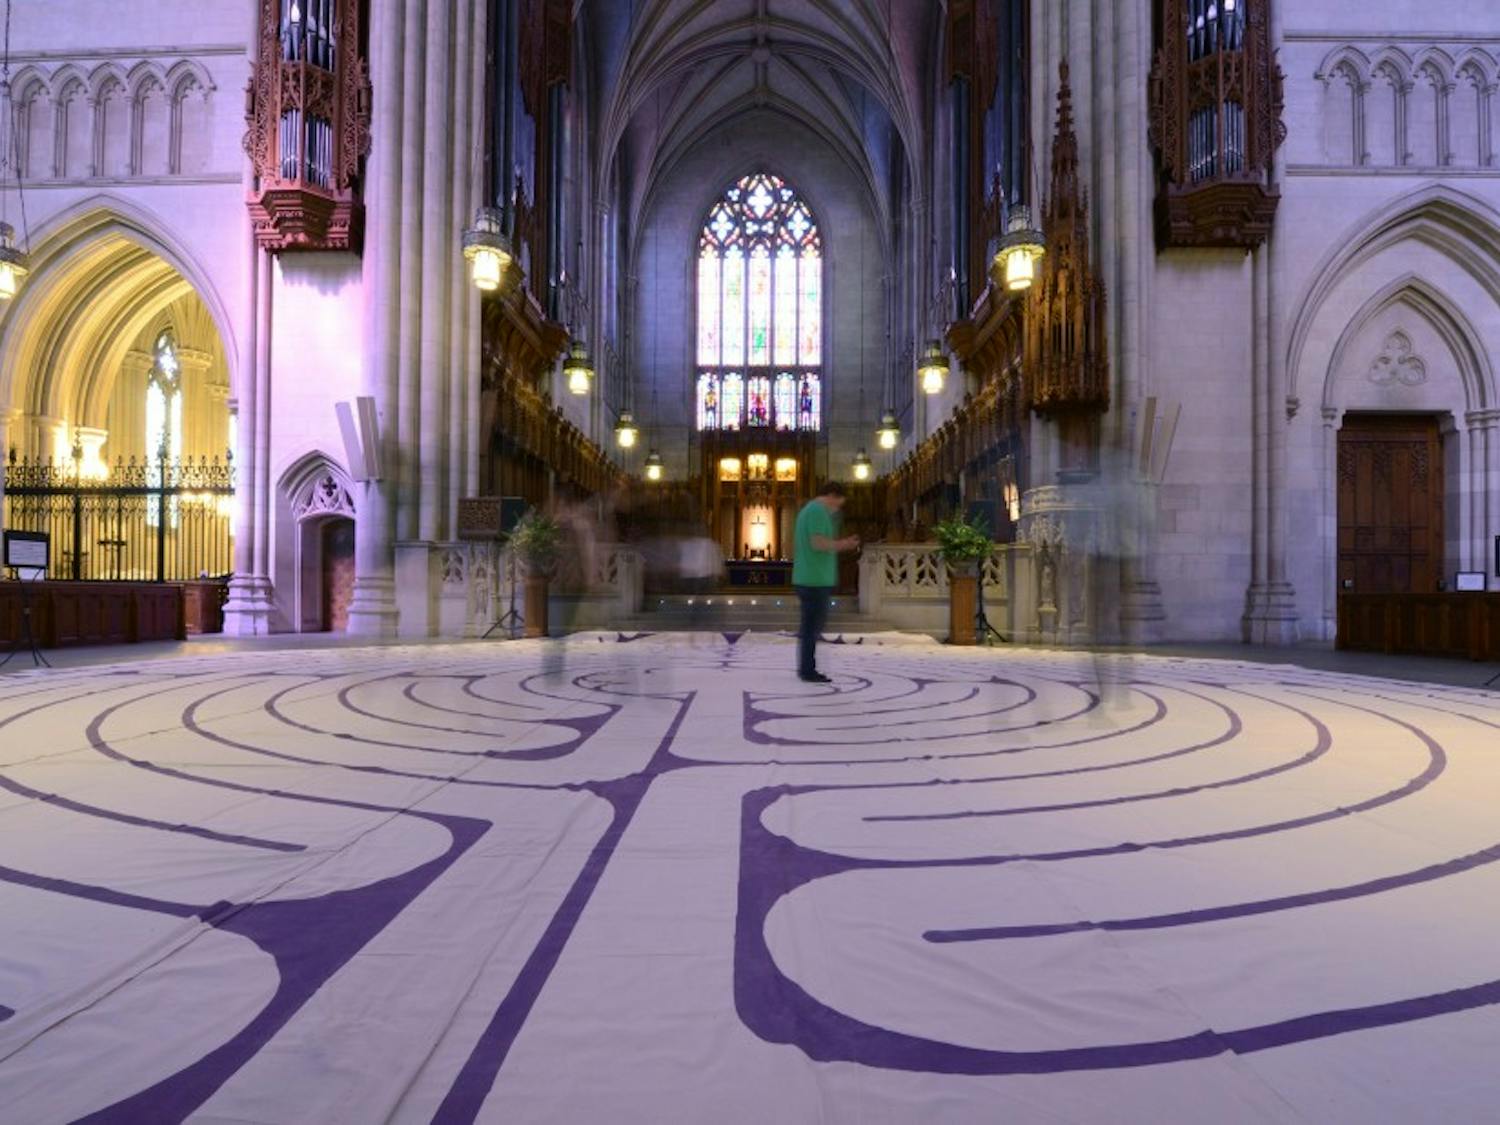 Hoping to attract members of the Duke, Divinity School and Durham communities, the labyrinth is a modern take on an ancient religious symbol used to help people find inner peace.